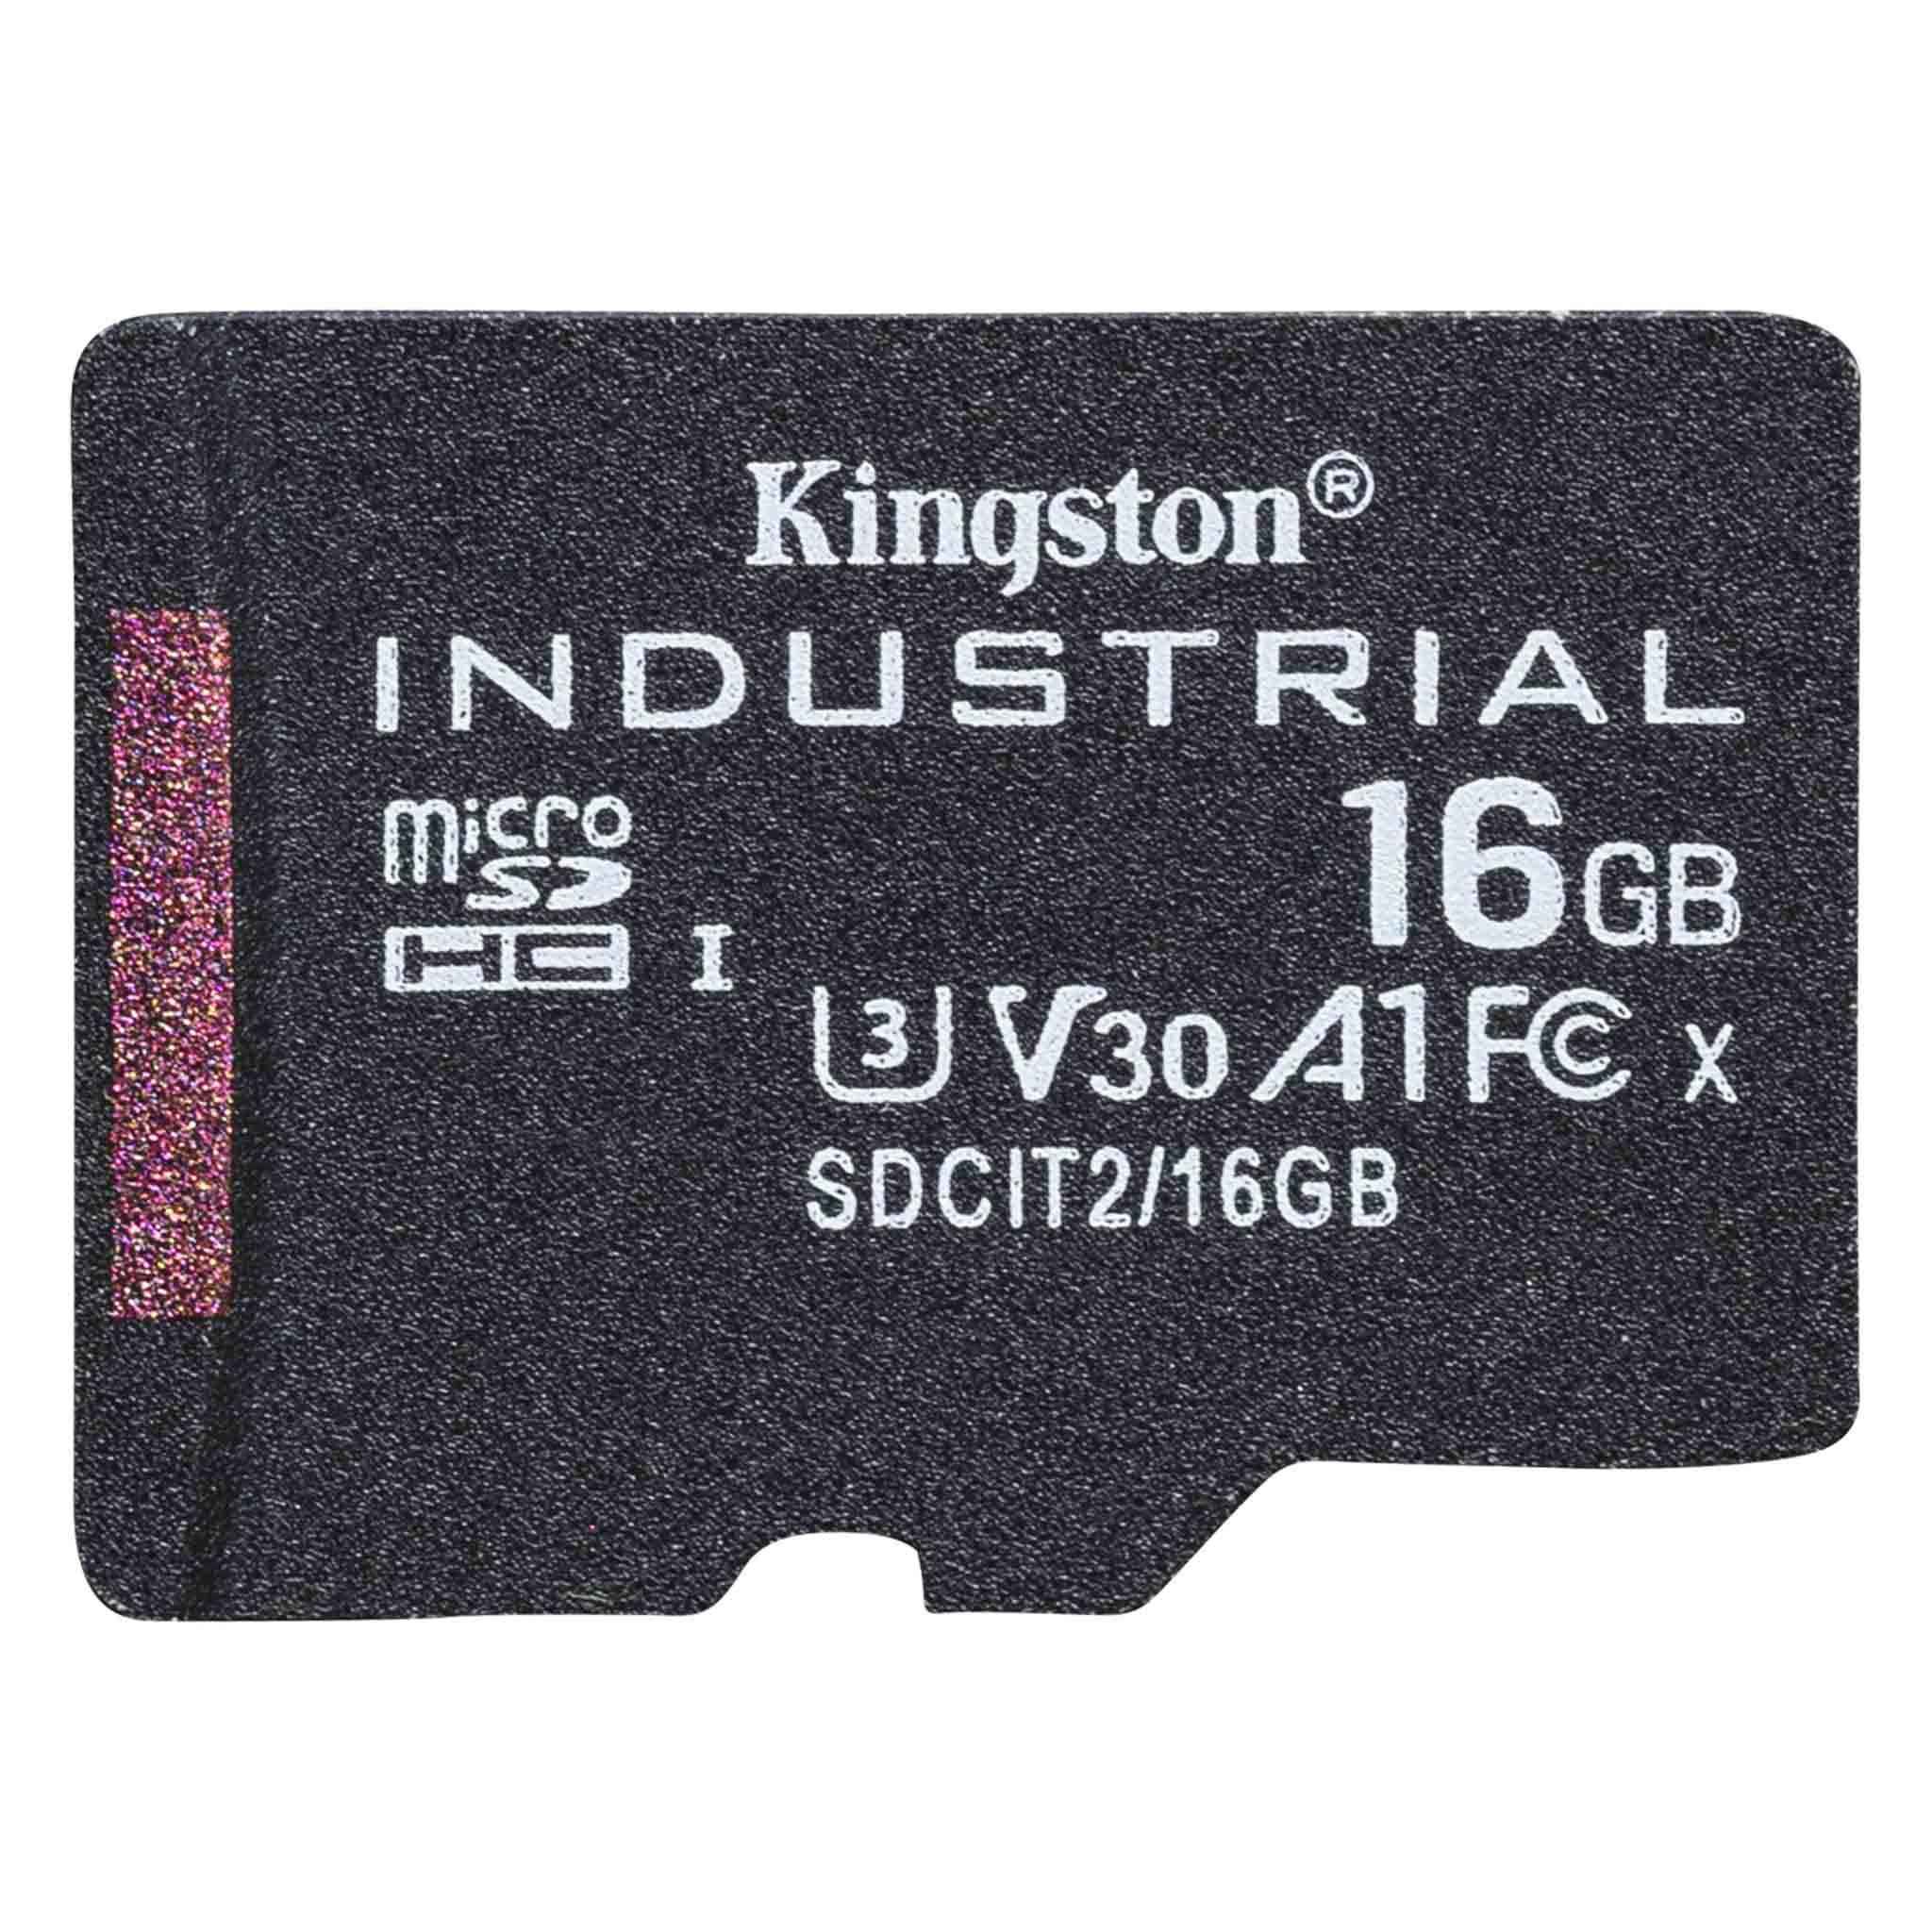 90MBs Works for Kingston Kingston Industrial Grade 8GB Samsung SM-J210F MicroSDHC Card Verified by SanFlash. 